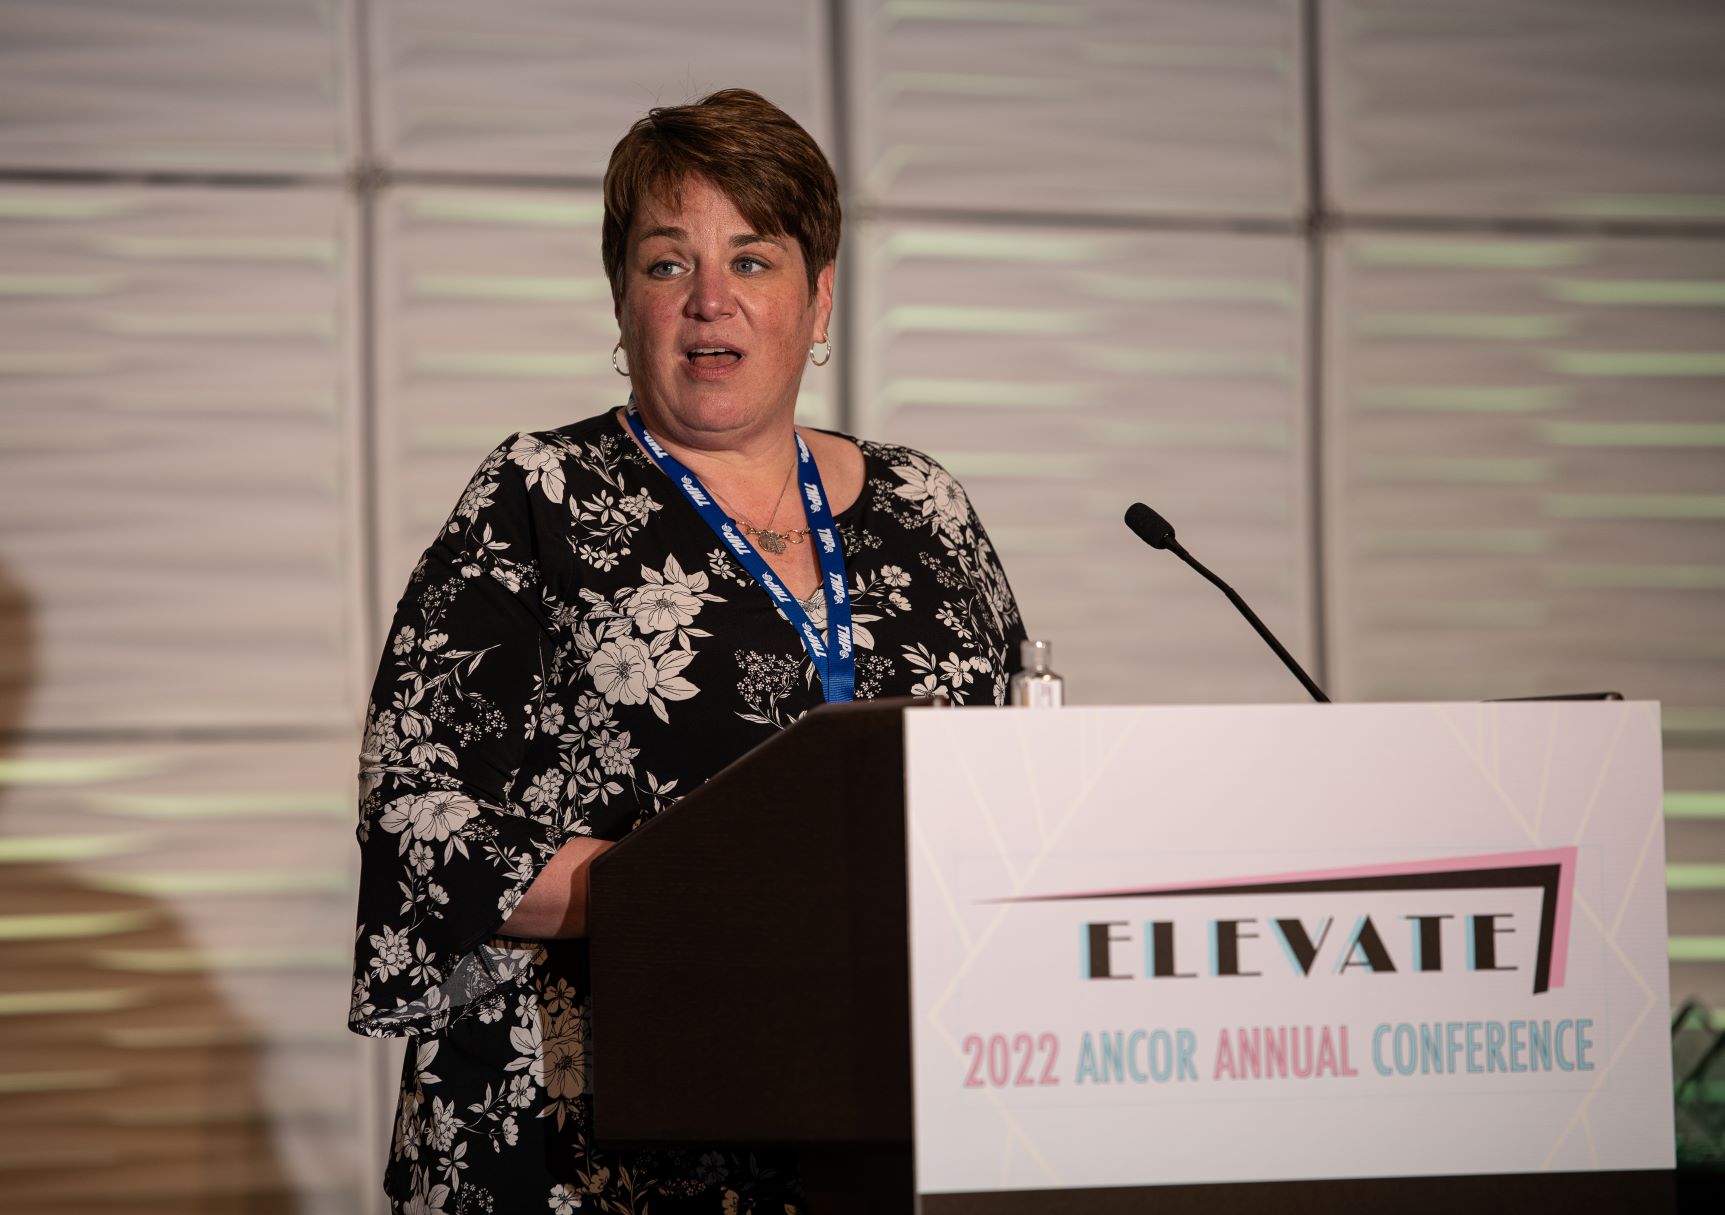 ANCOR Foundation Board member speaking at a podium at the 2022 Annual Conference.